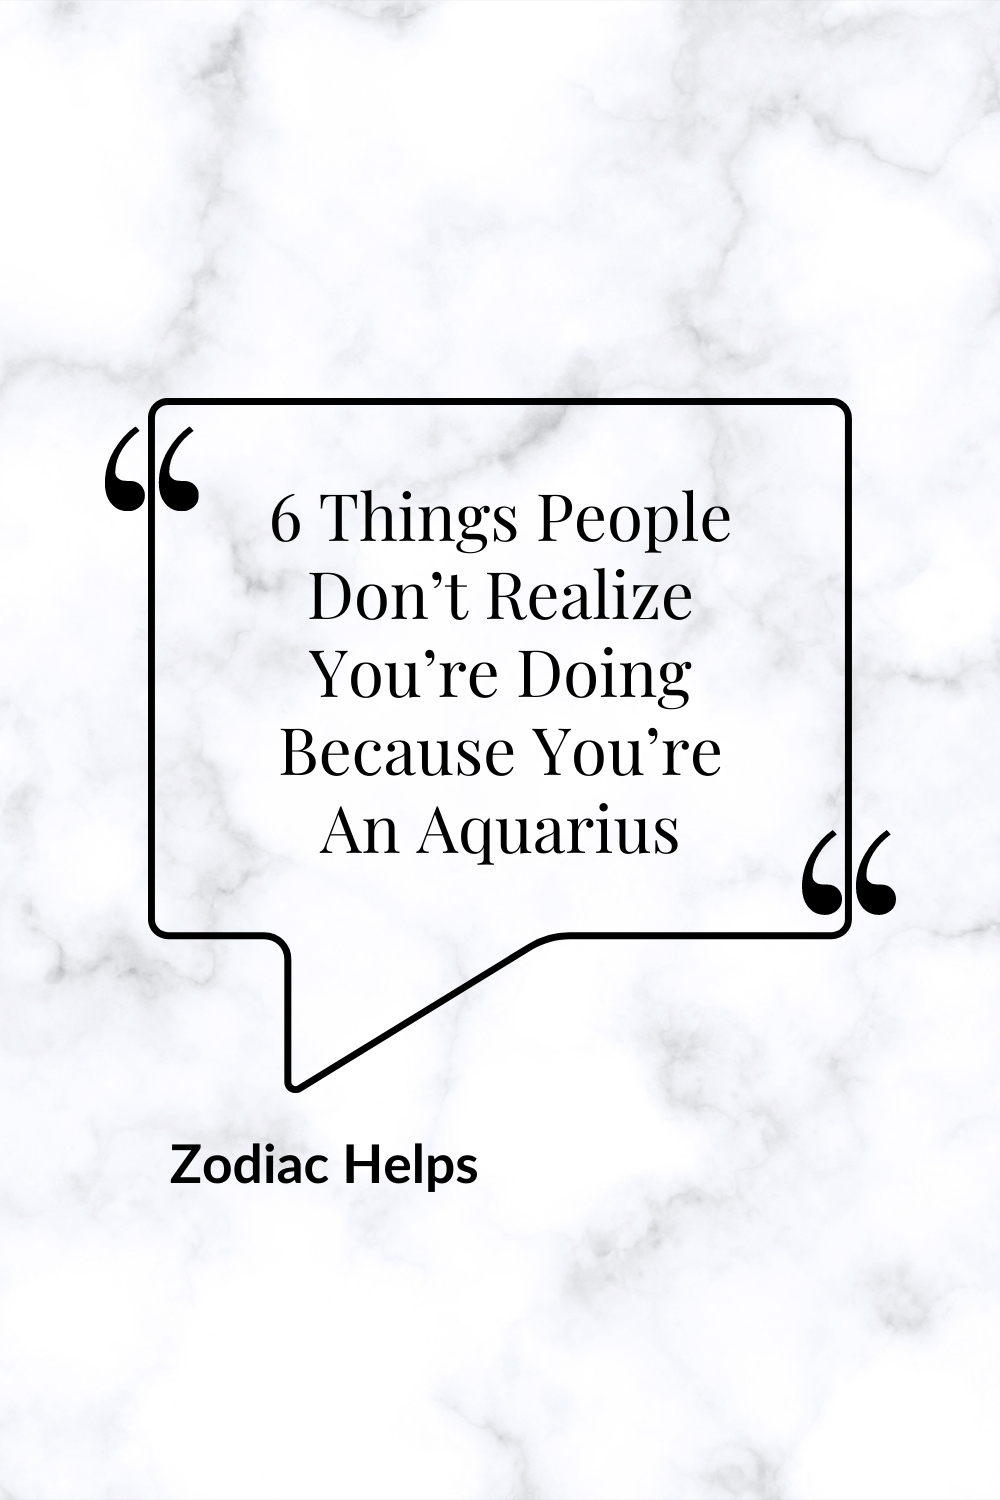 6 Things People Don’t Realize You’re Doing Because You’re An Aquarius